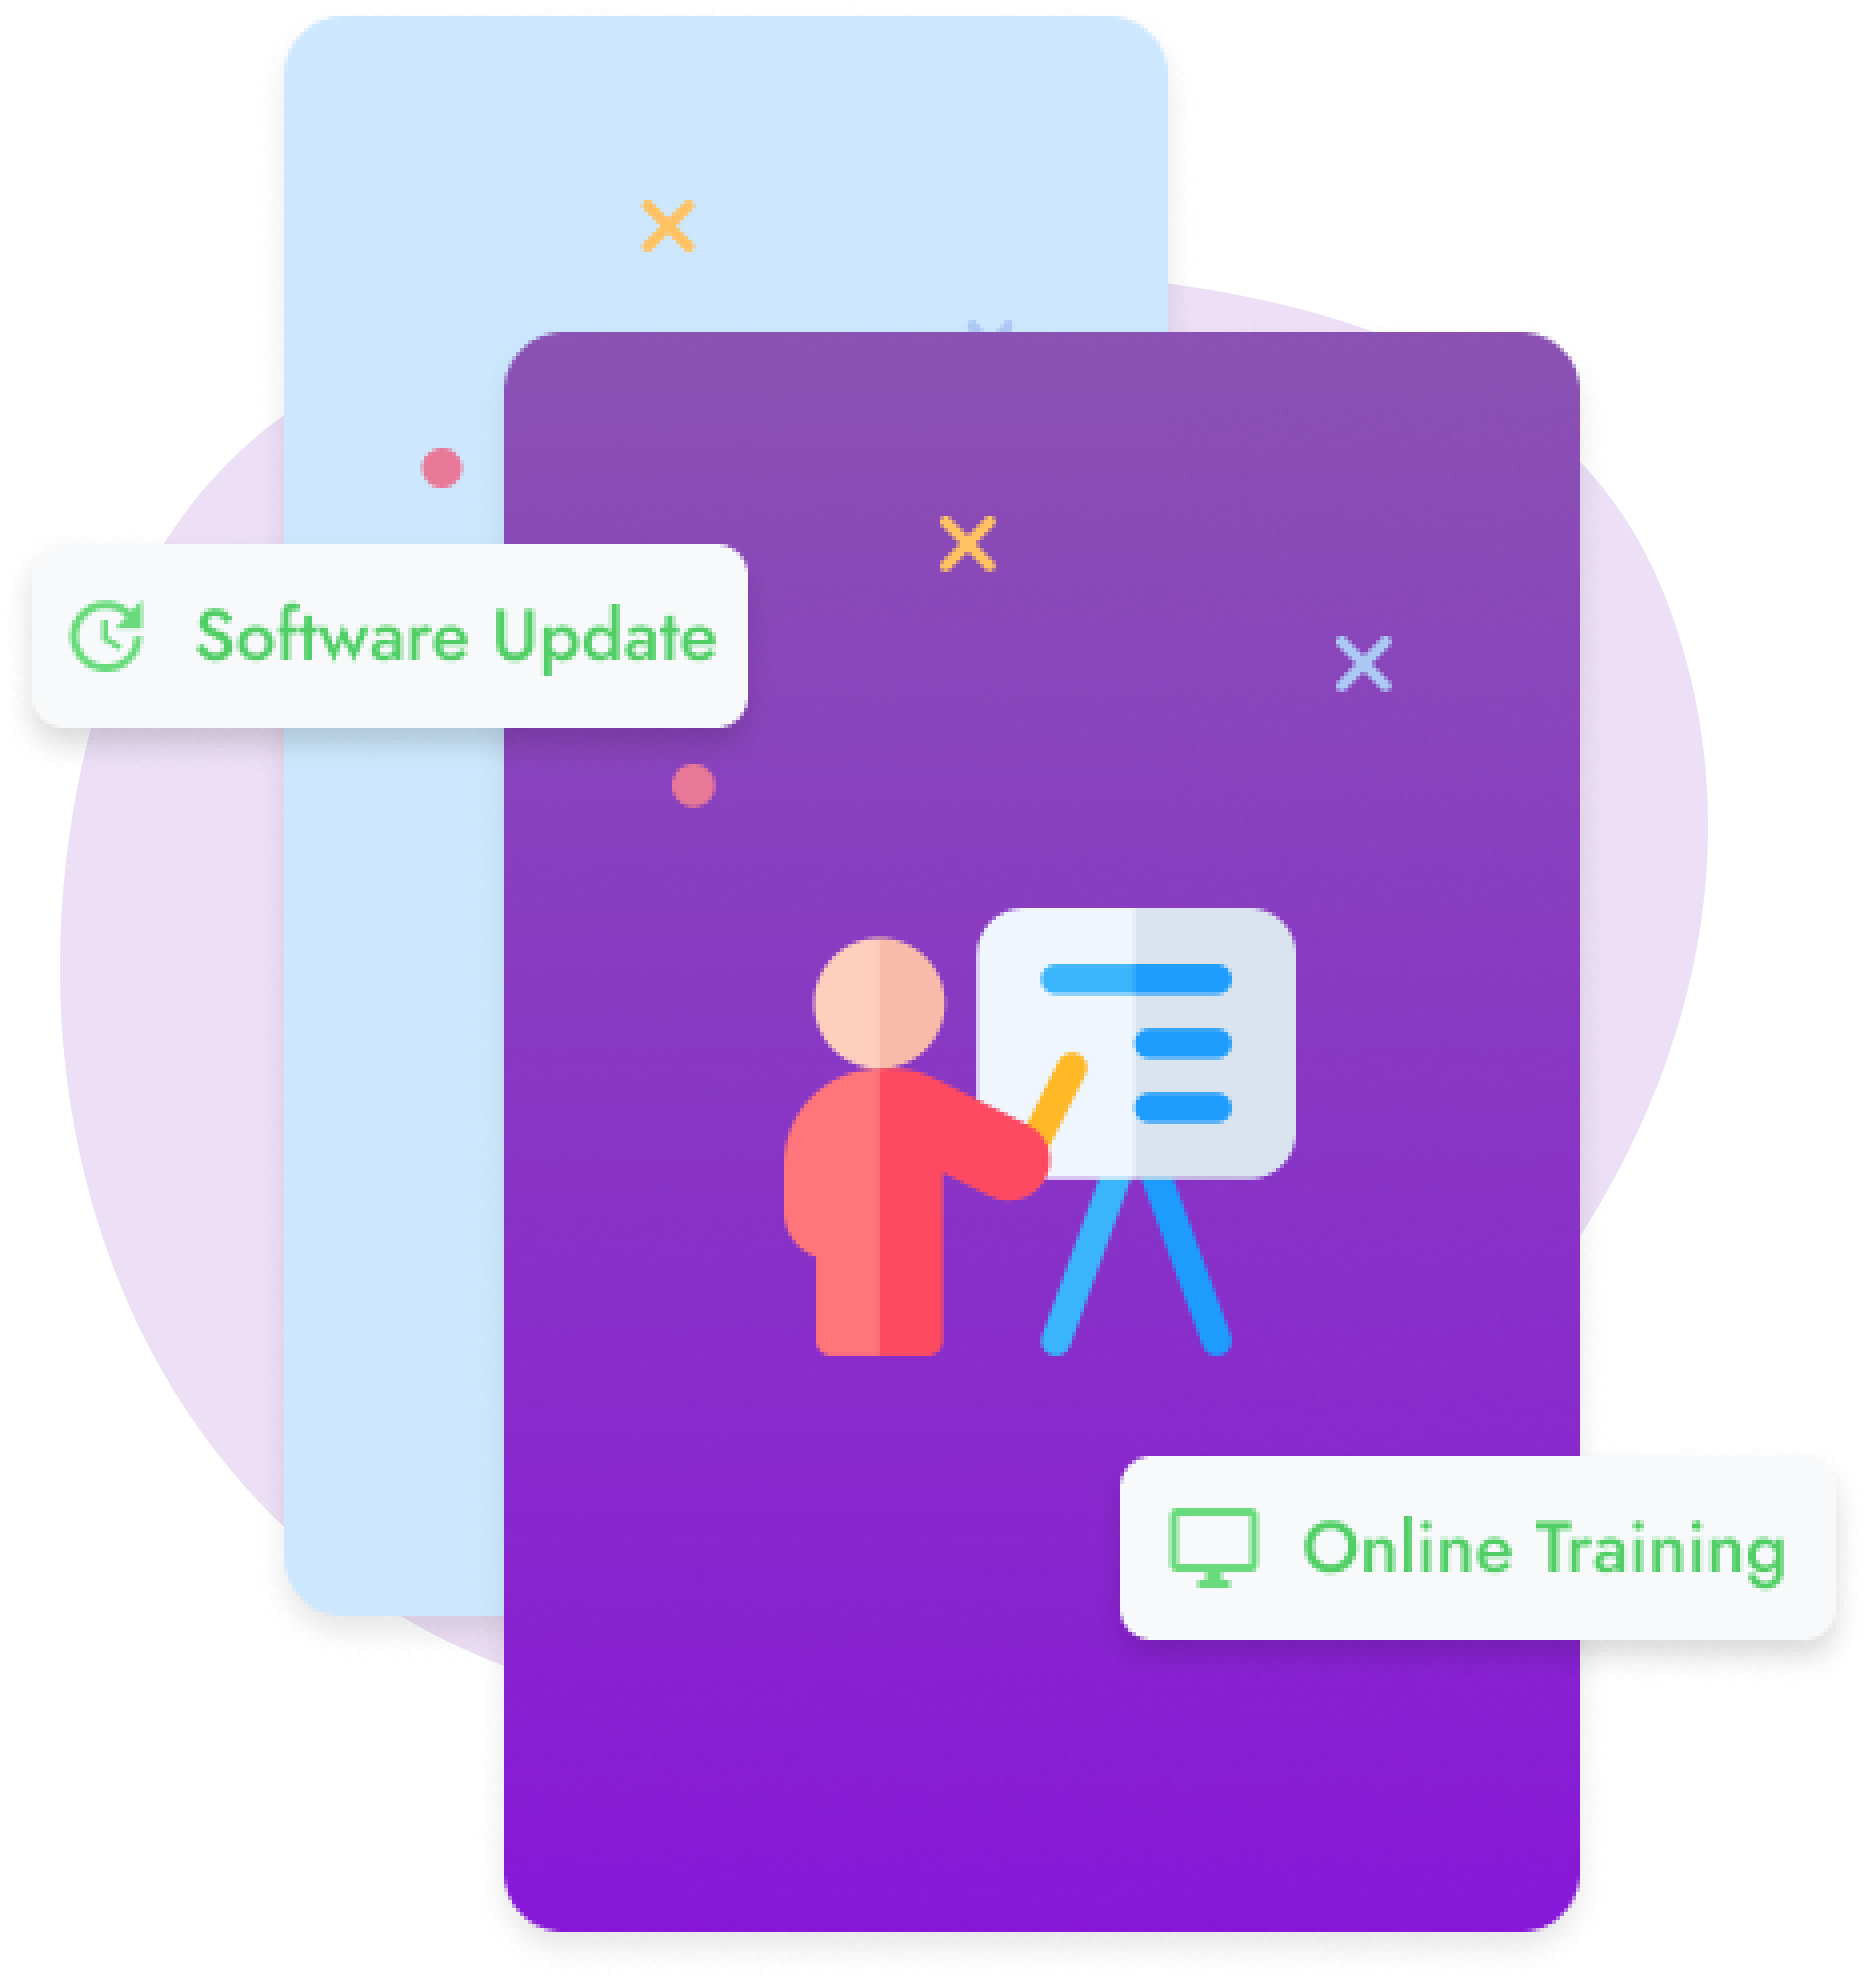 Free Support with Software Updates and Training